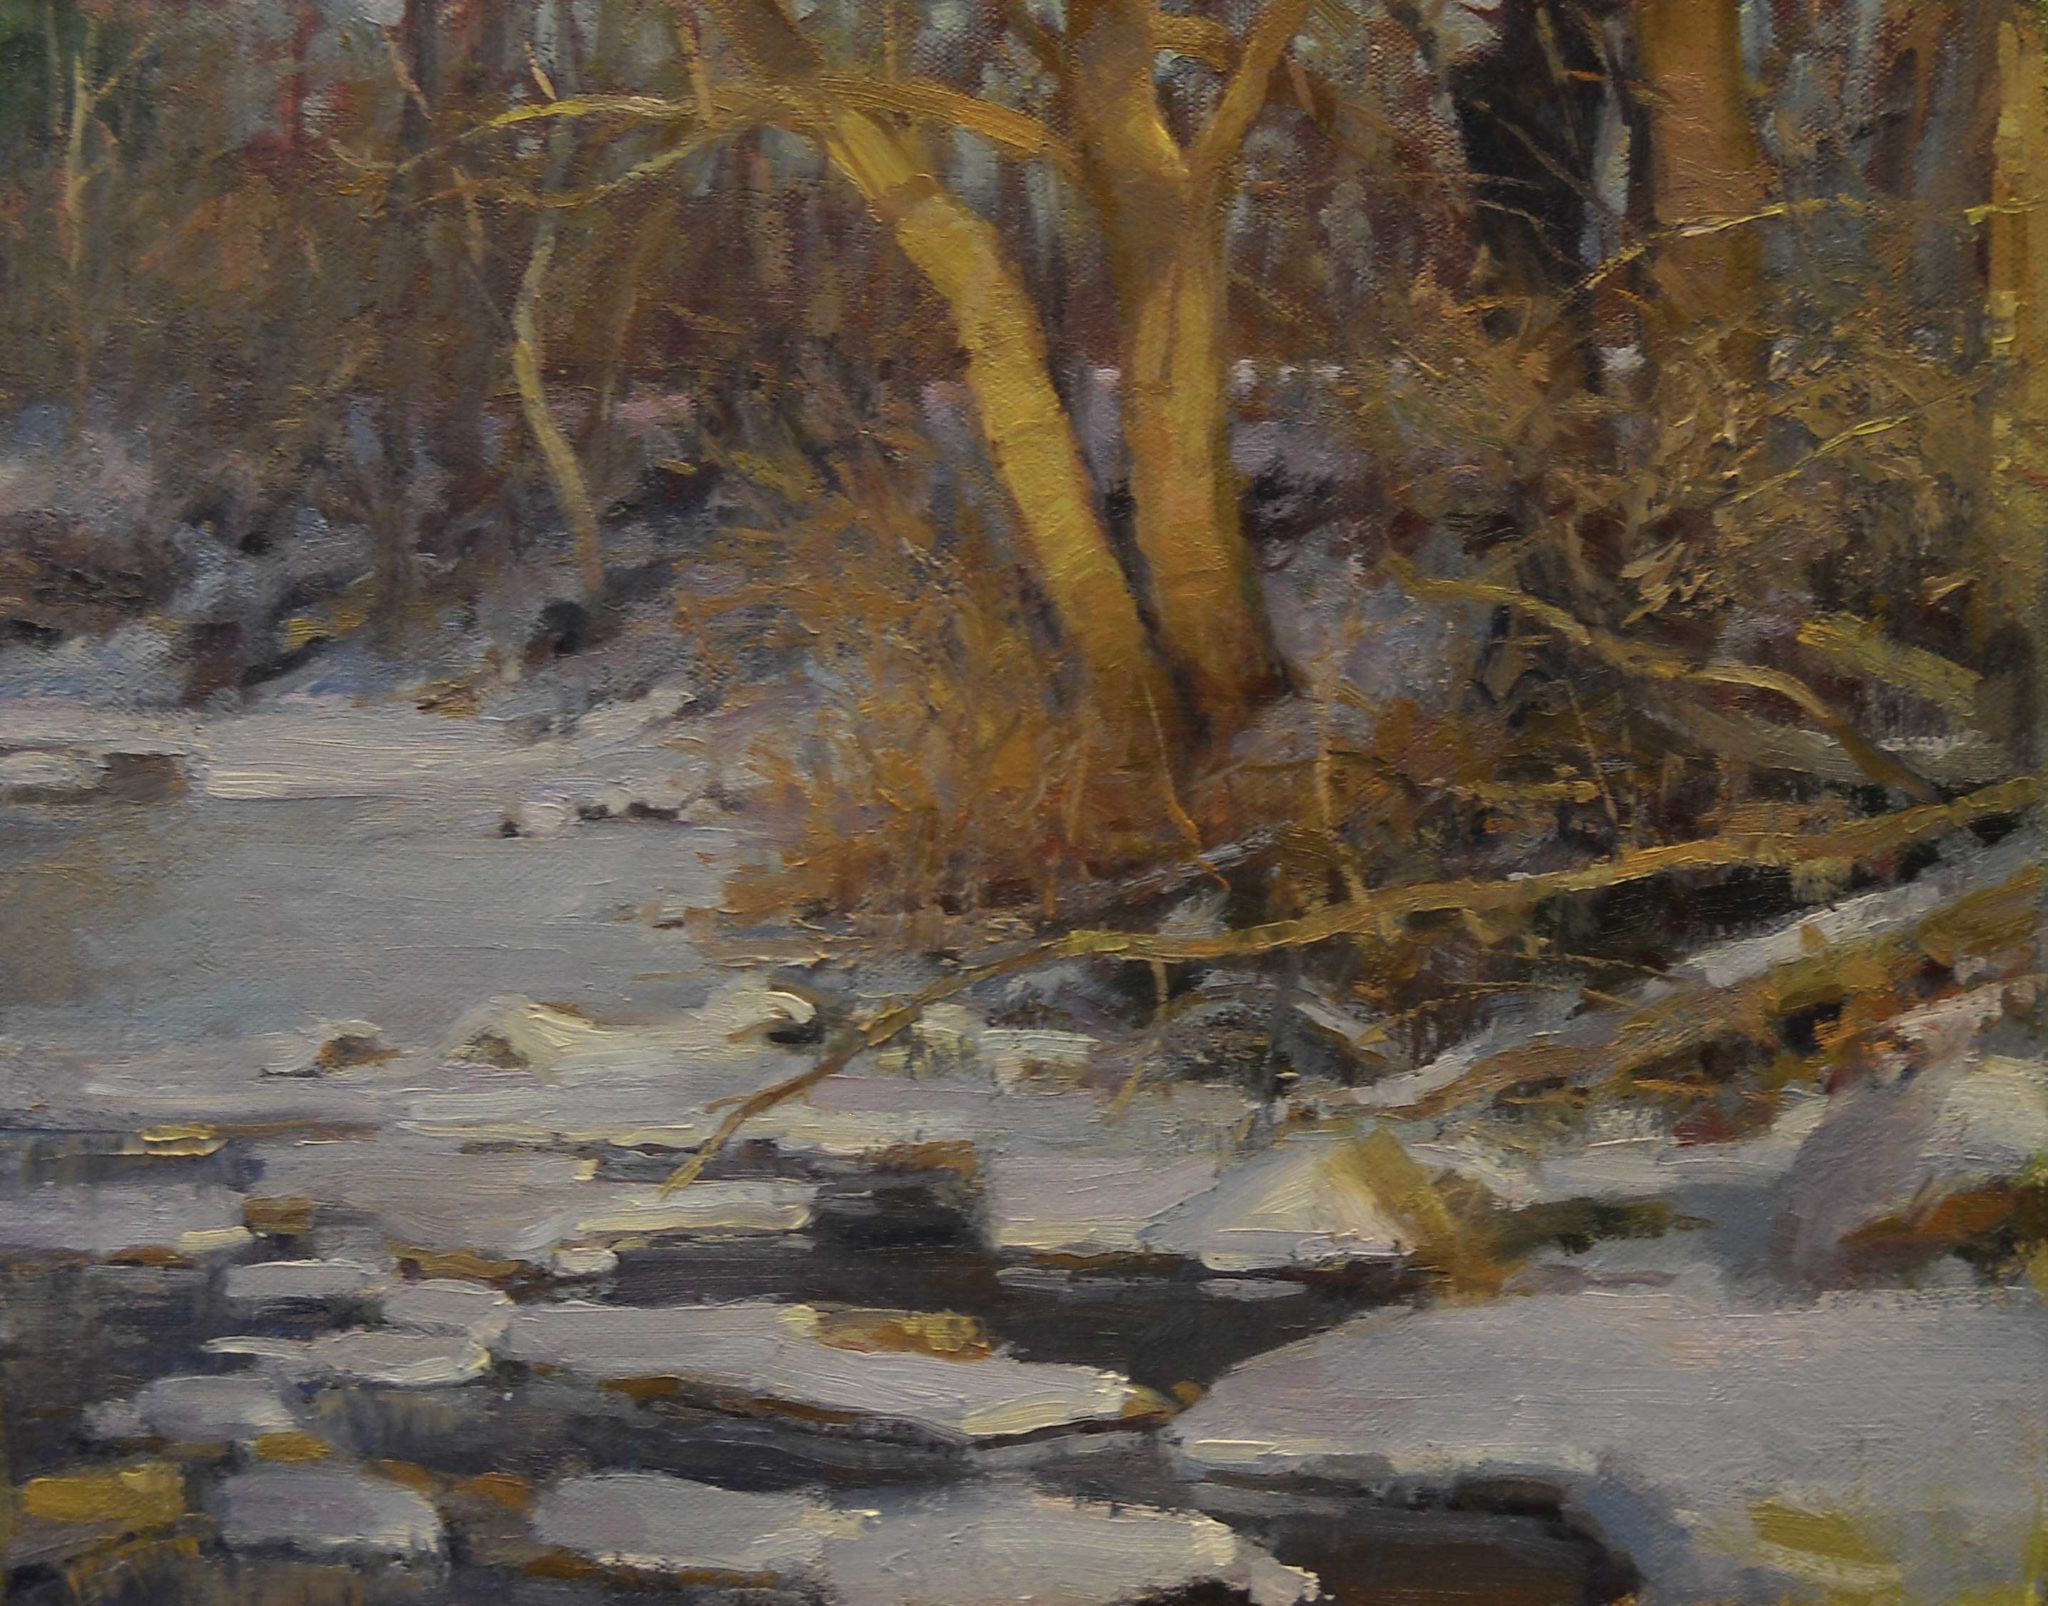 How to paint snow - Chuck Marshall landscape painting